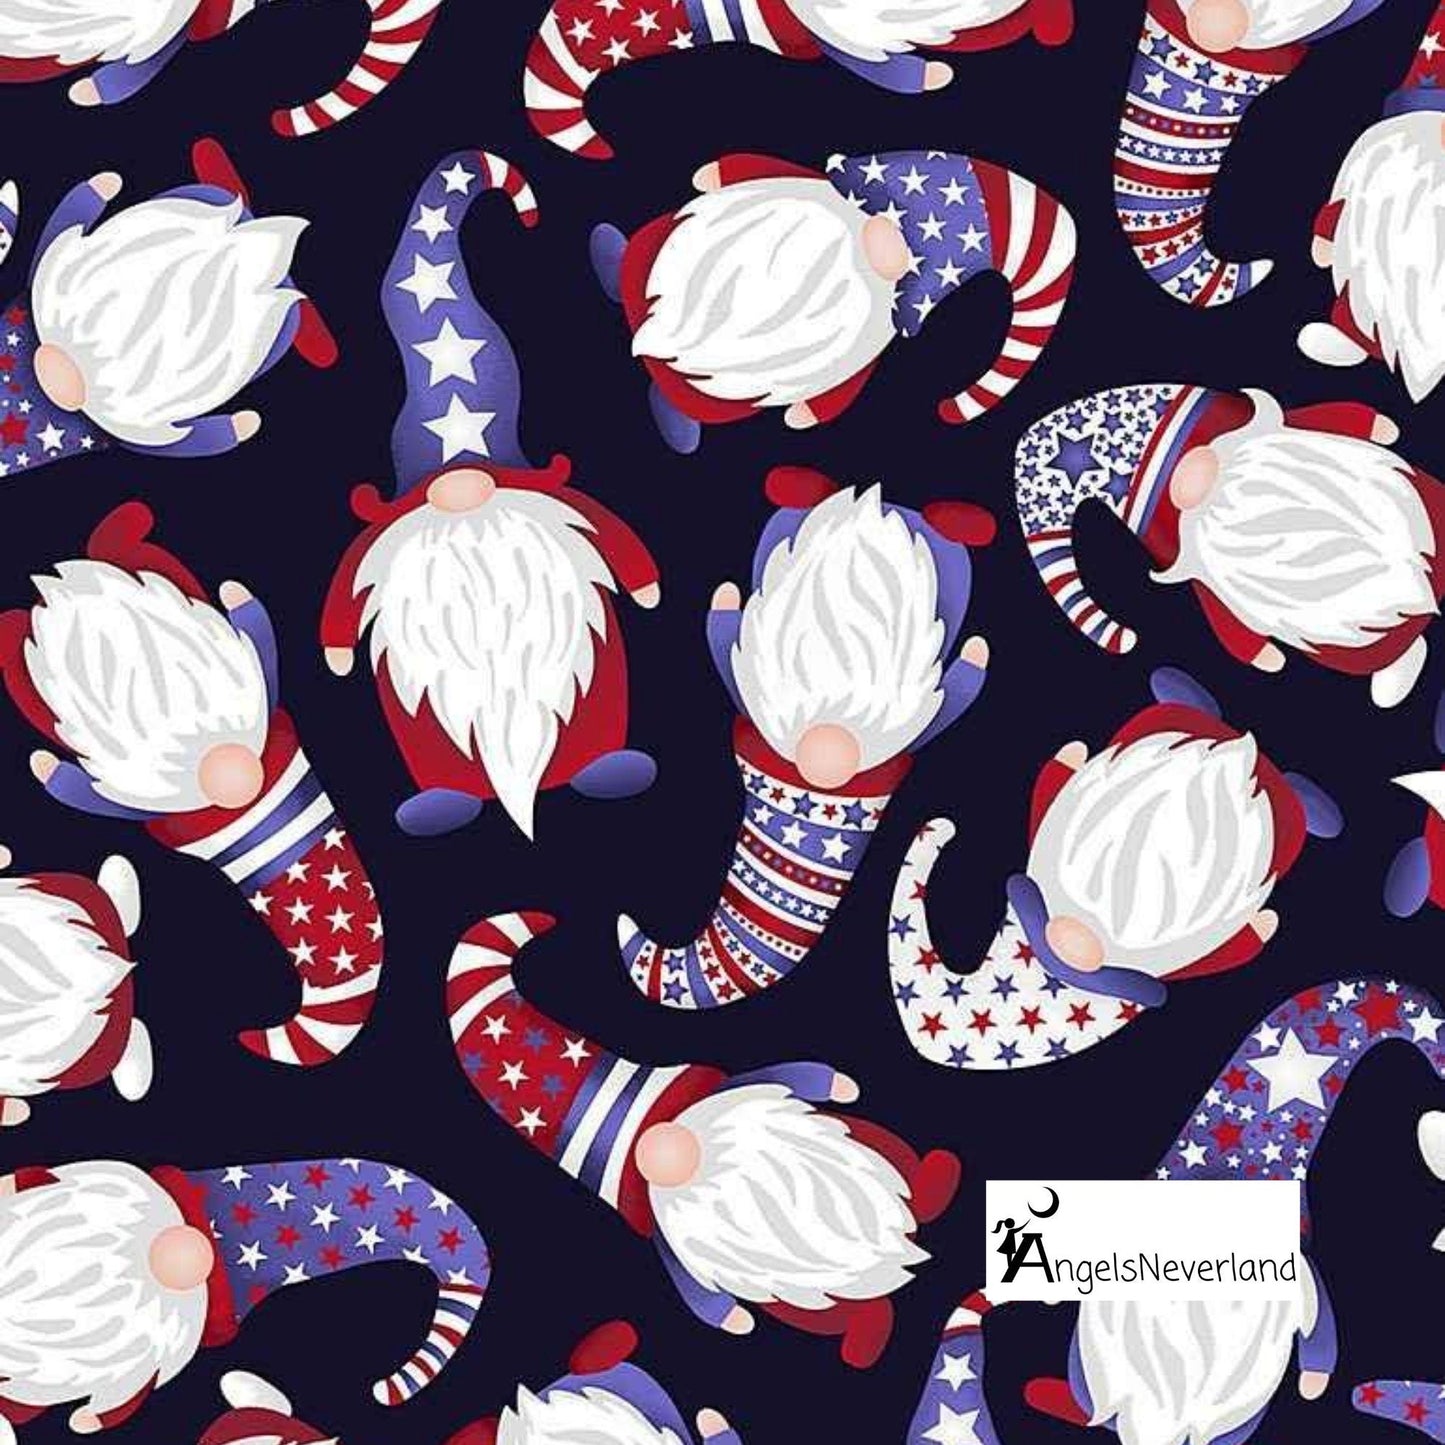 Timeless Treasures Fabric 1 yard (36"x44") / Gnomes Timeless Treasures Gnome of the Free & Brave, Patriotic Stars Blue or Stripes